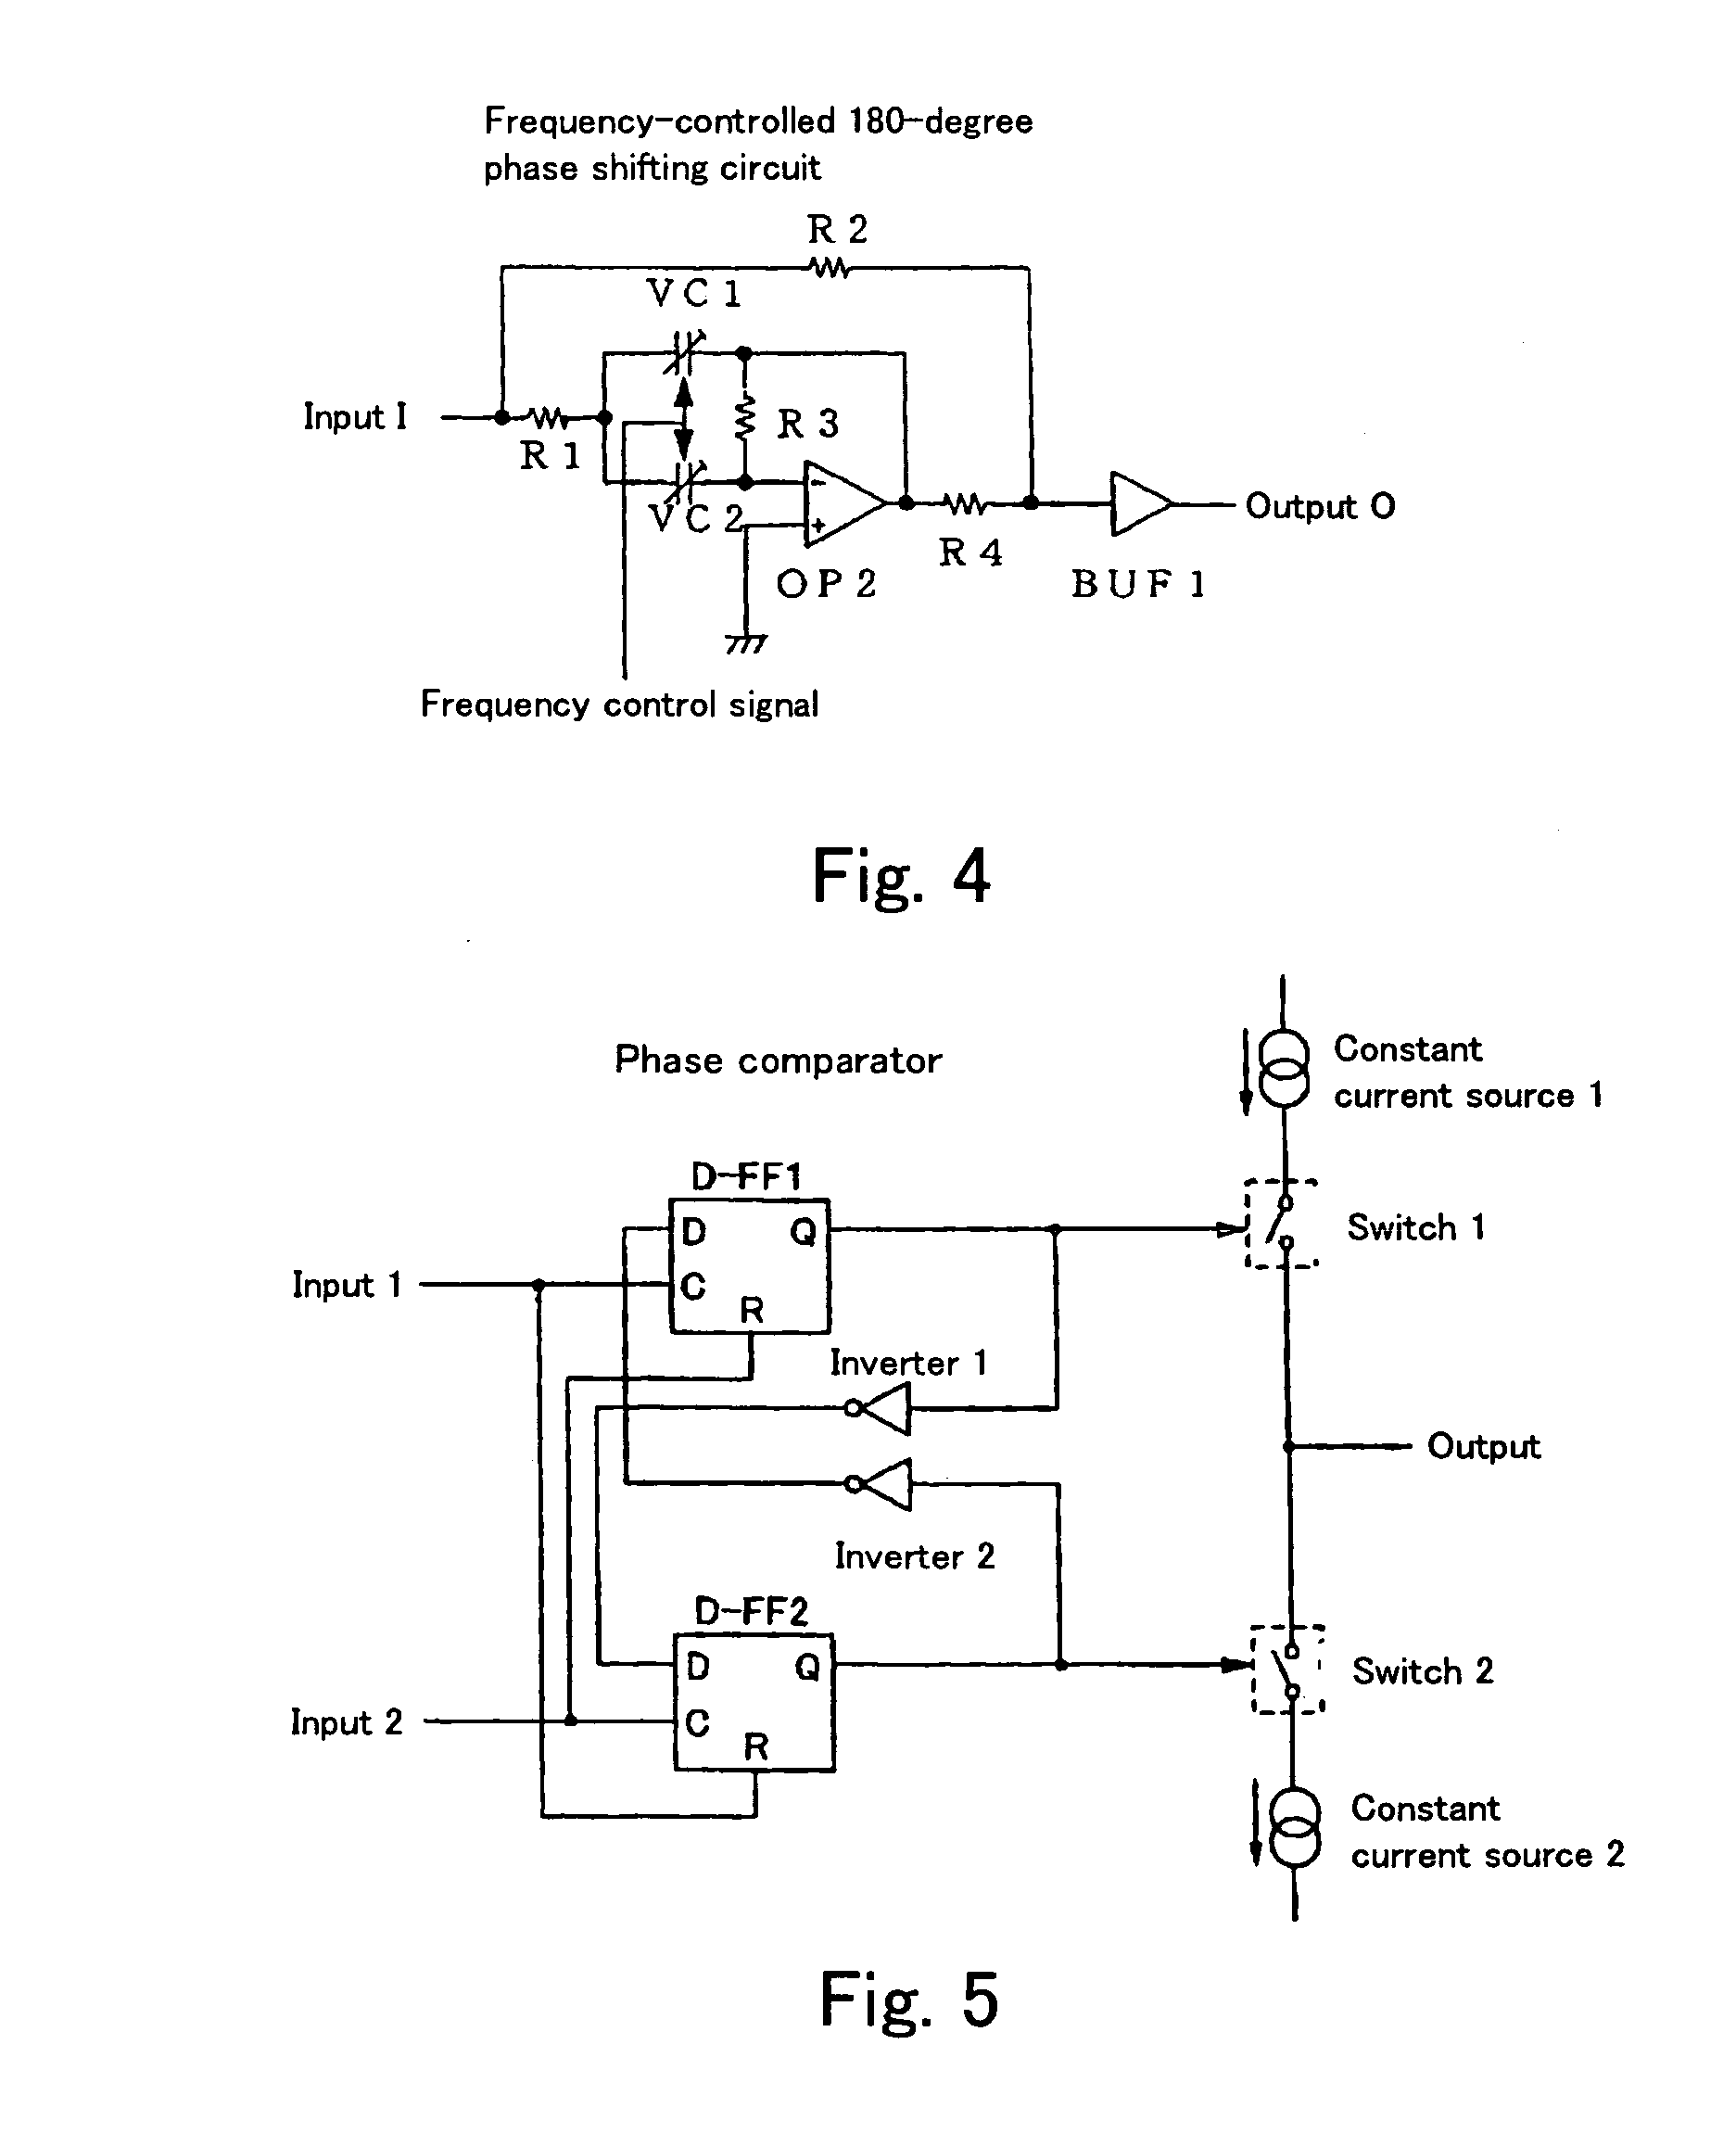 Noise removal using 180-degree or 360-degree phase shifting circuit